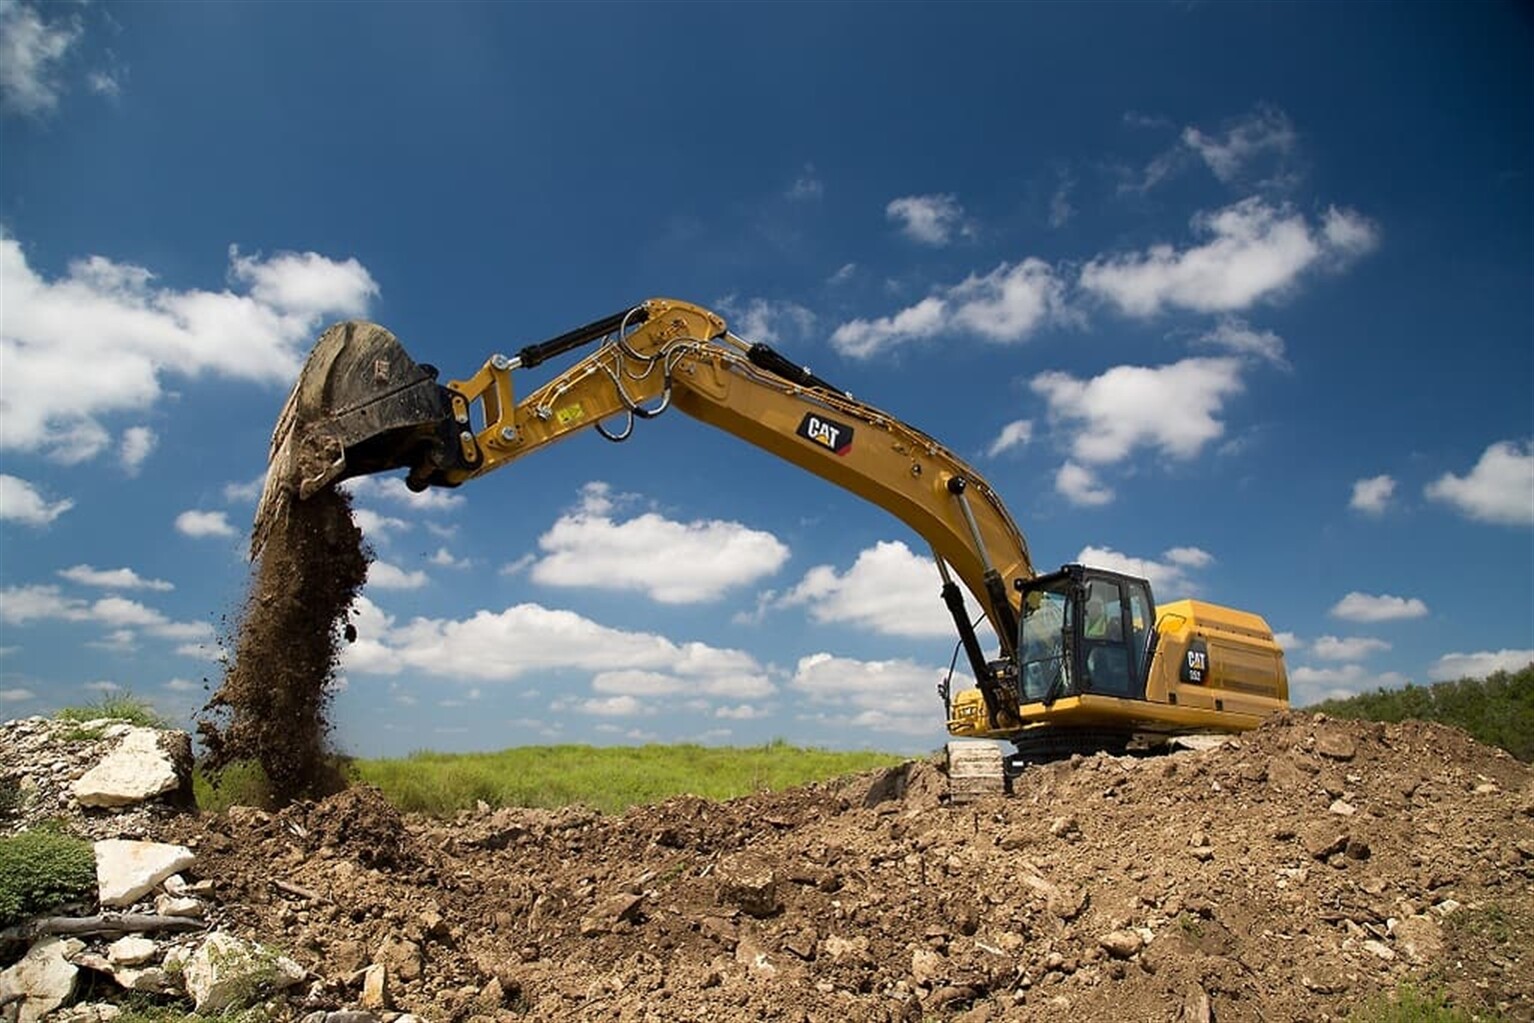 Covers are off Cats Next Generation 50-tonne Class Excavators